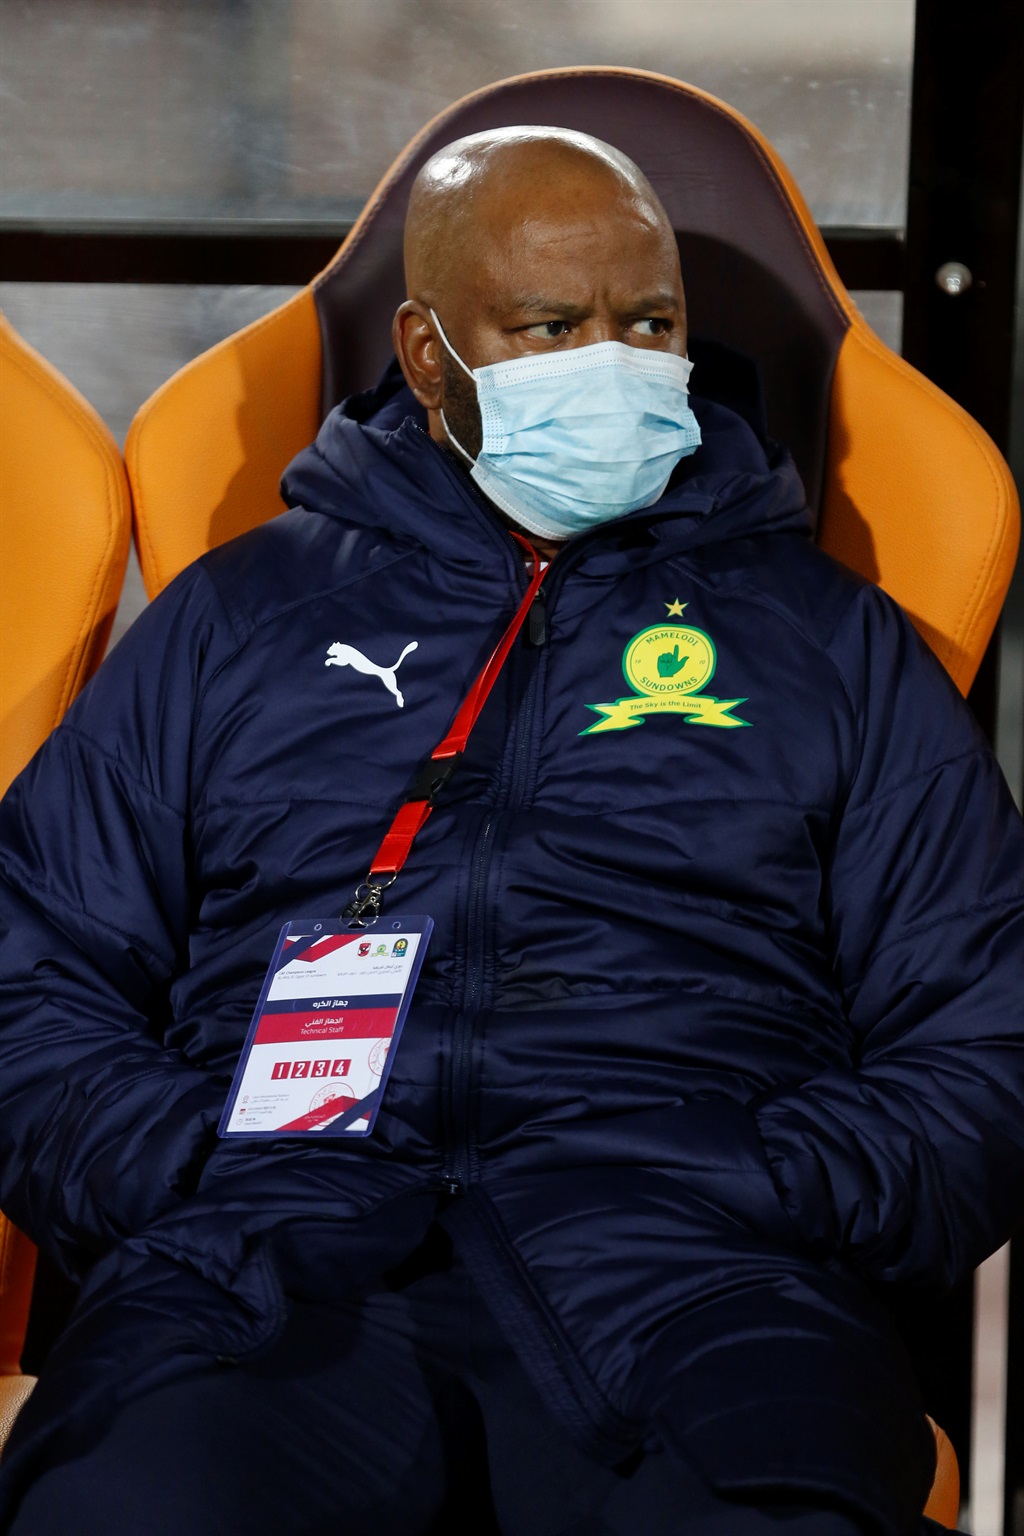 Mamelodi Sundowns coach Brilliant Manqoba Ferriman Mngqithi during the CAF Champions League 2021/22 football match between Al Ahly and Mamelodi Sundowns held at the Cairo International Stadium in Cairo, Egypt on 26 February 2022 Â©Weam Mostafa/BackpagePix